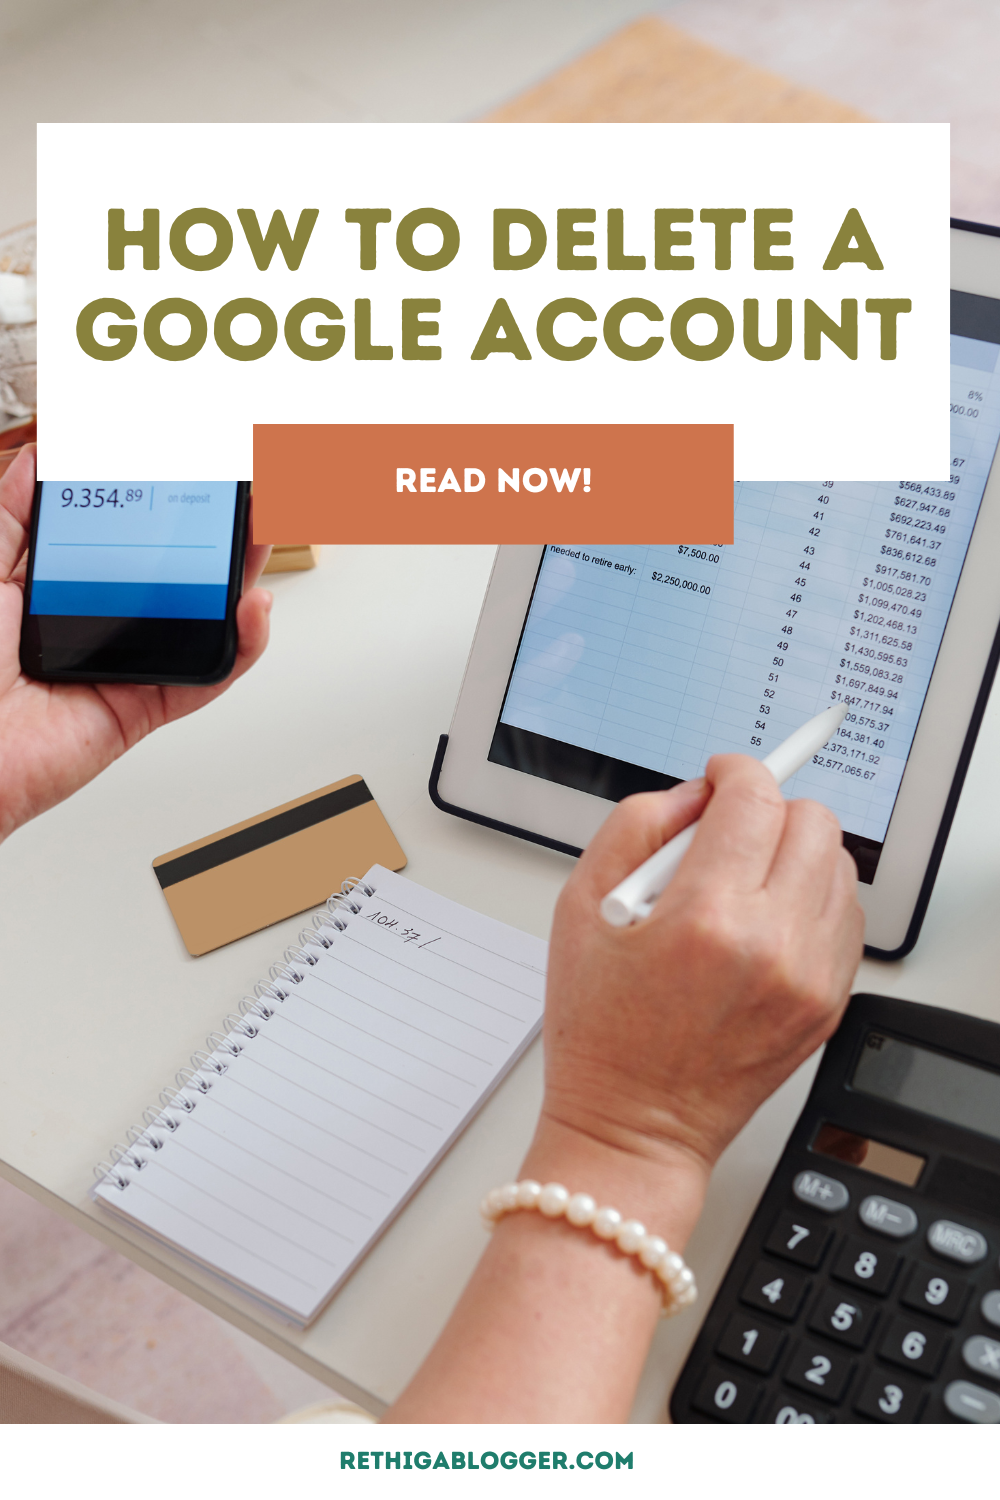 How to Delete a Google Account